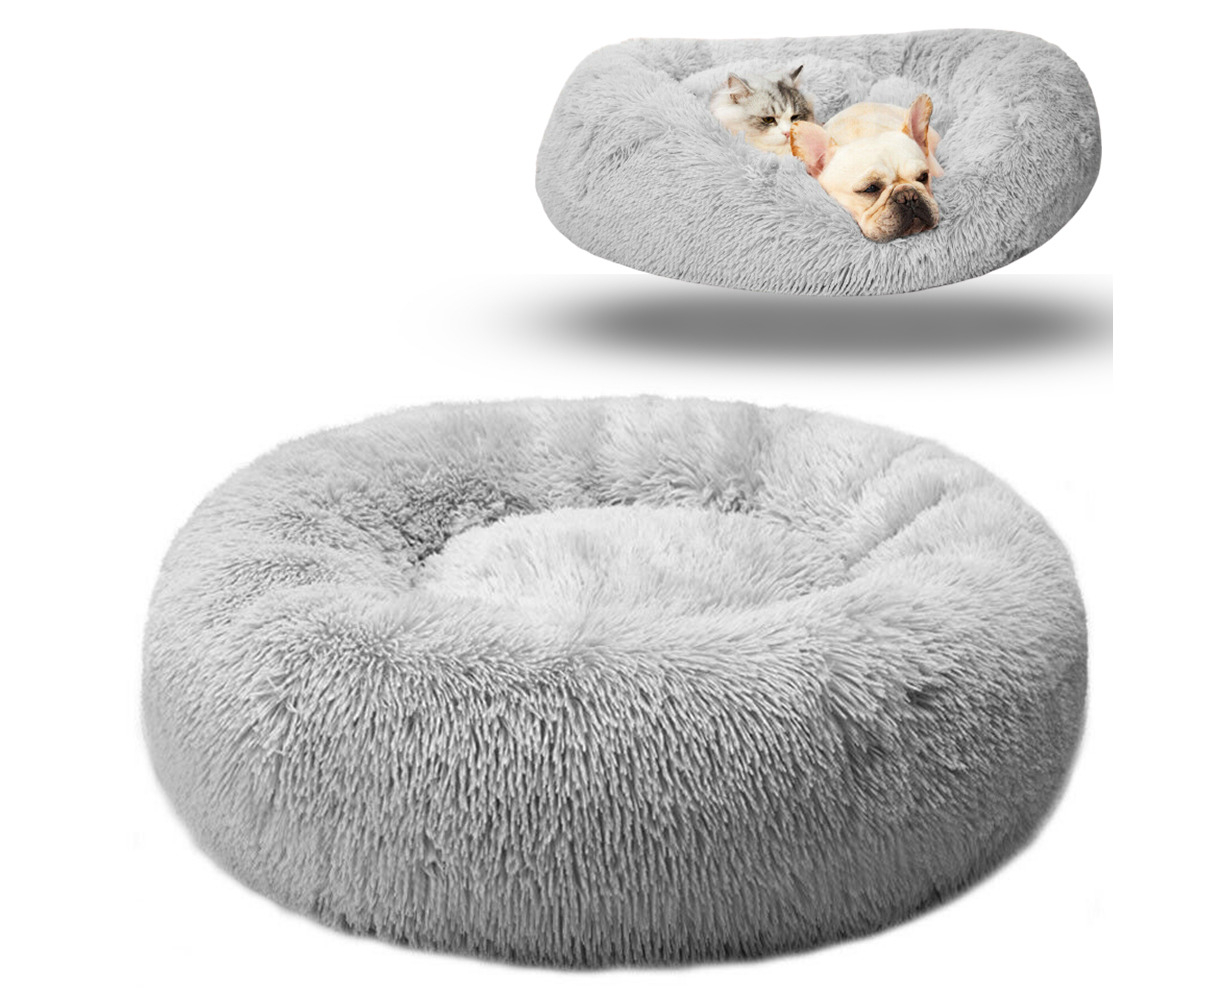 Luxury Plush Donut Pet Bed Dog Cat Cuddler Round Cushion Warm Puppy Sofa Self-Warm Sleeping Bag Orthopedic Relief and Improved Sleep Thicken Plush Kennel Puppy Nest Cat Calming Bed with Anti Slip Base 